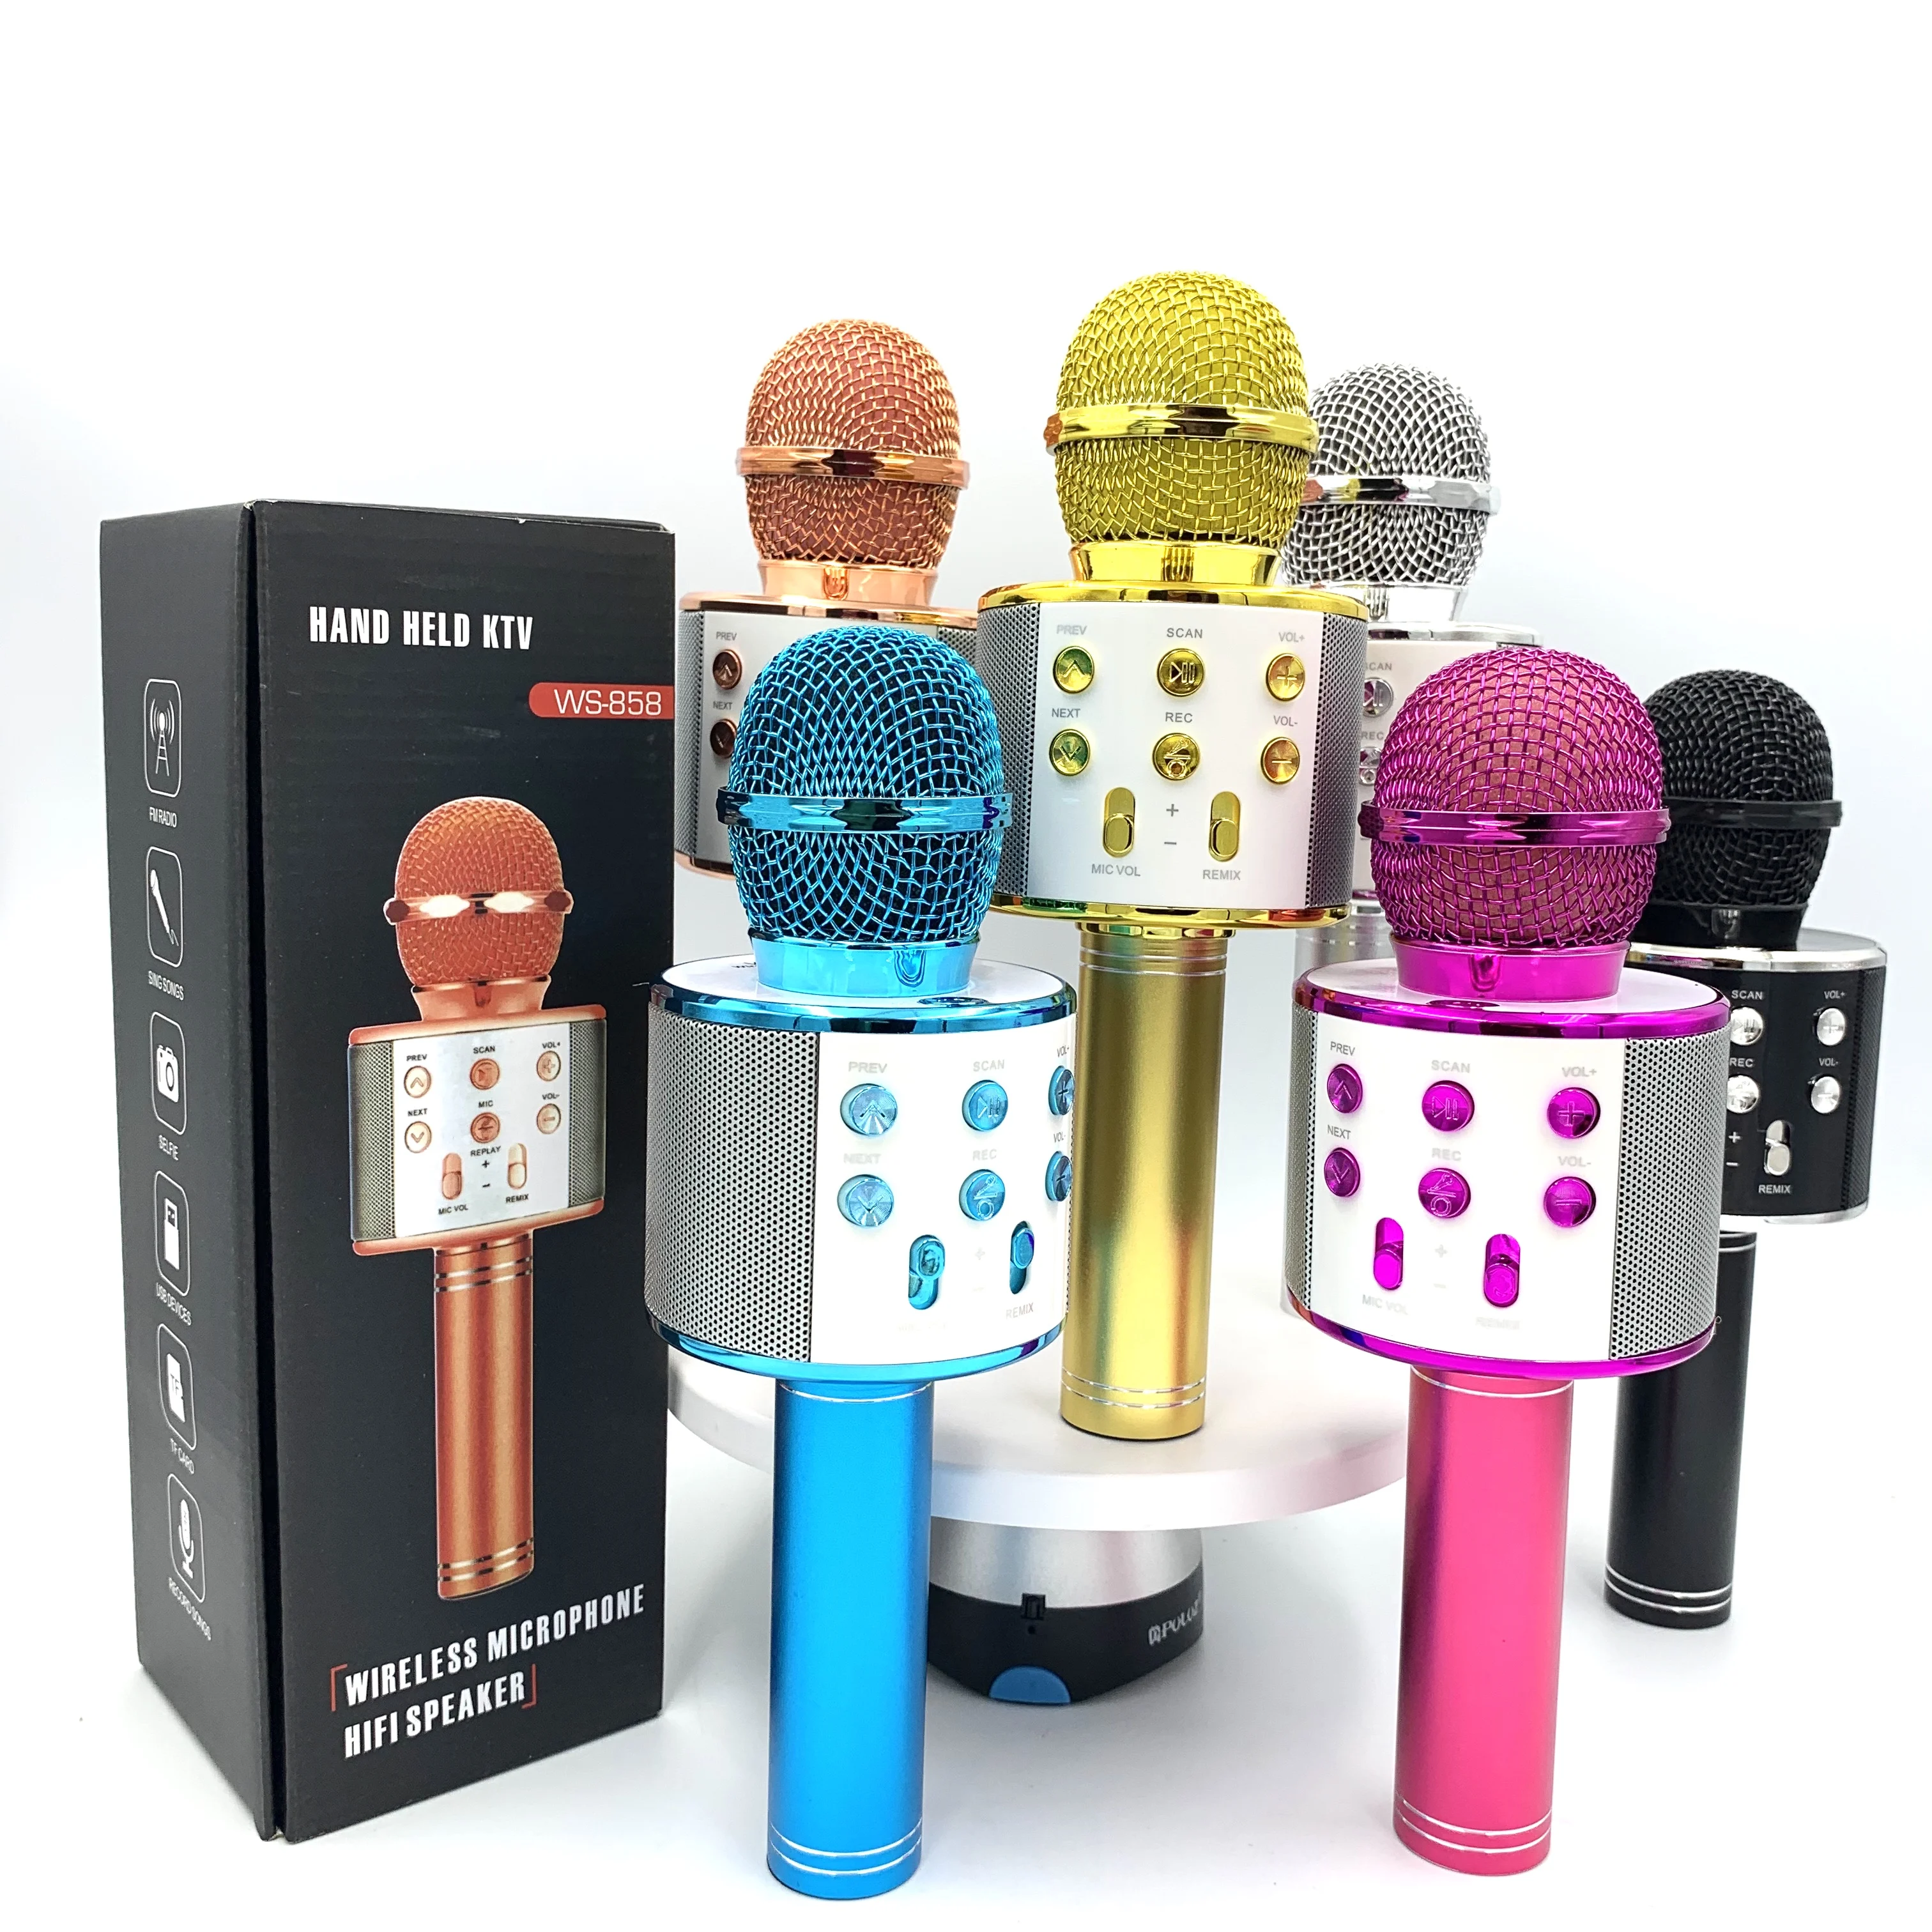 

Ws858 Professional Microfonos Mic Magic Sing Led Kid Portable Speaker Ws 858 Wireless Karaoke Microphone For Home Party Ktv Tv, Black/rose gold/gold/blue/purple